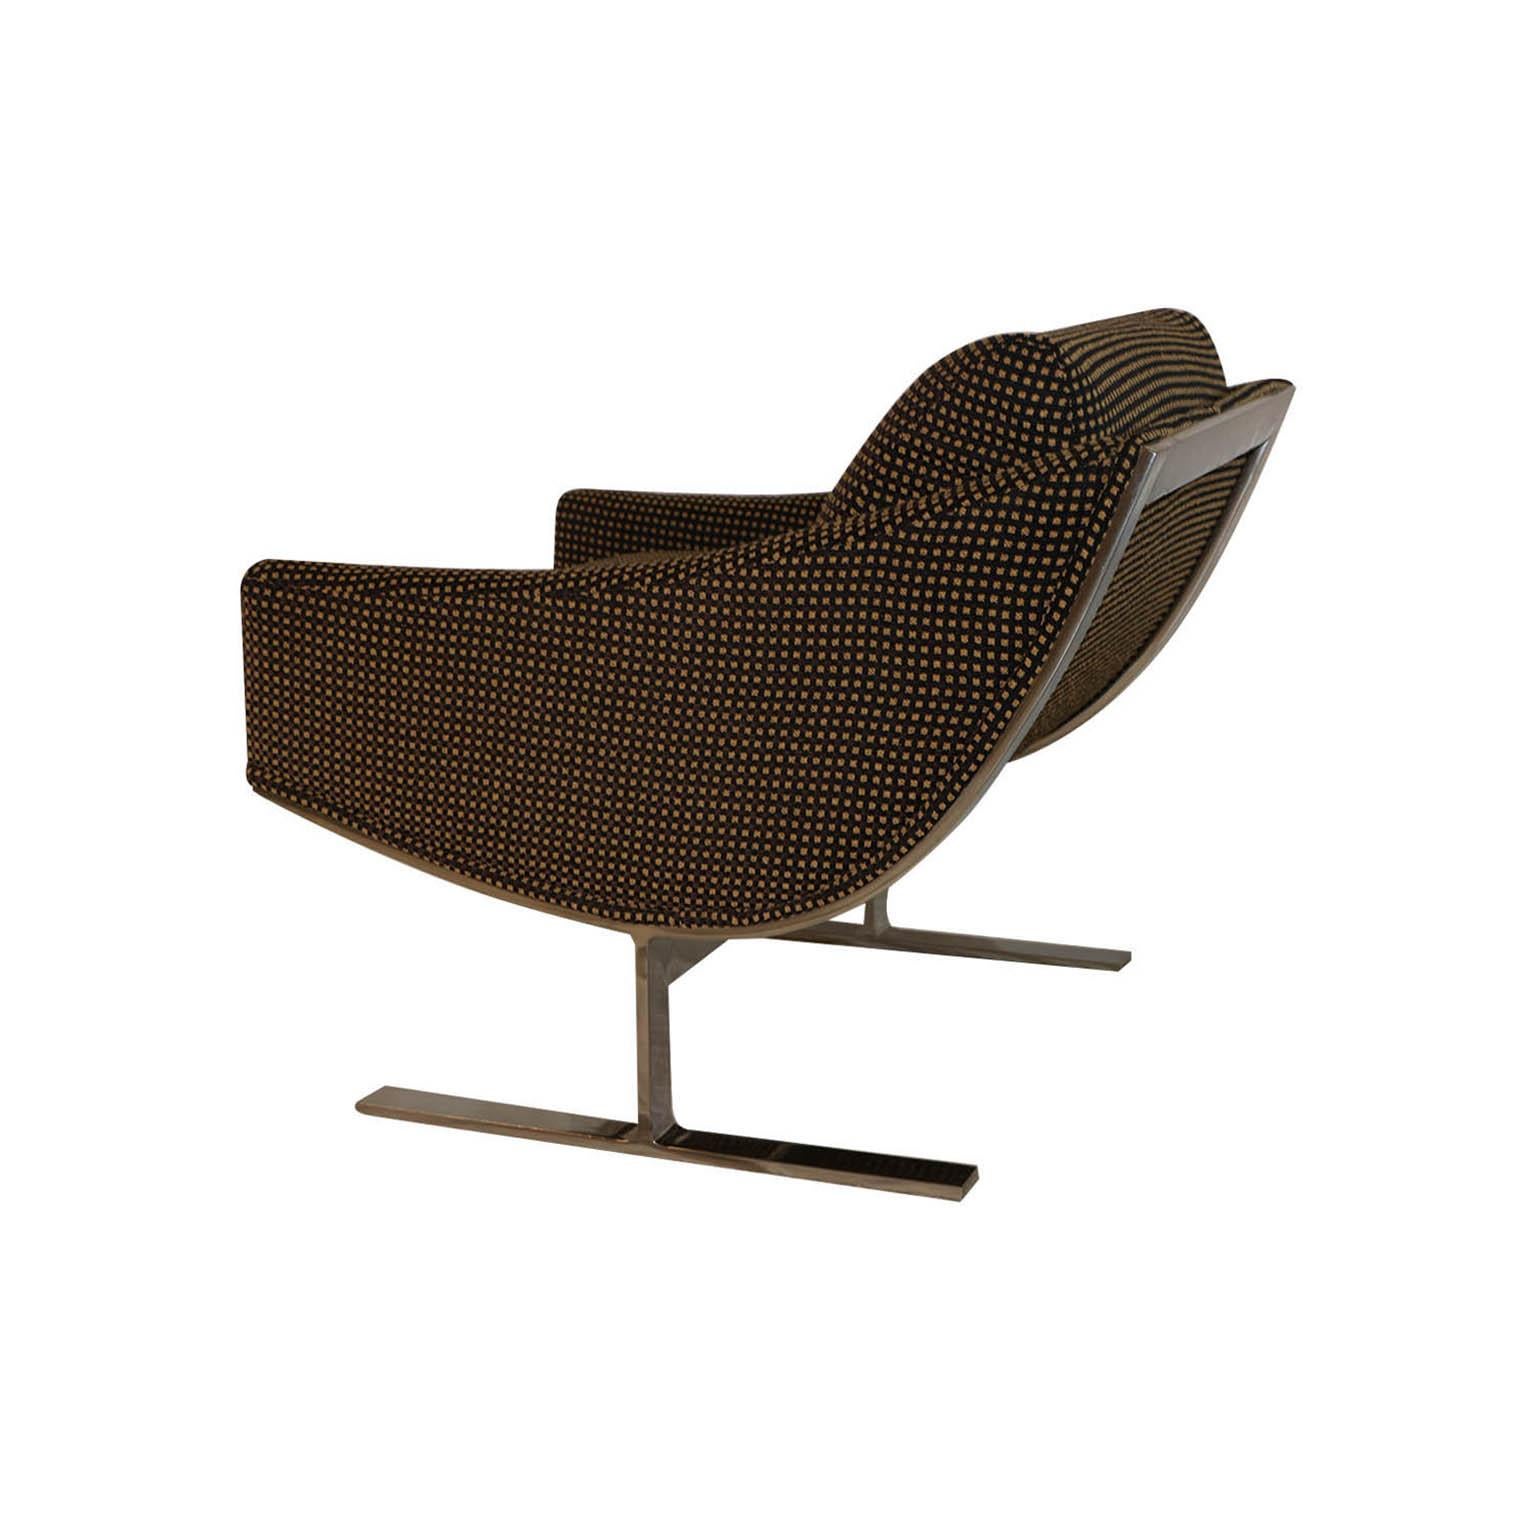 American Midcentury Kipp Stewart “Arc Lounge Chairs” for Directional For Sale